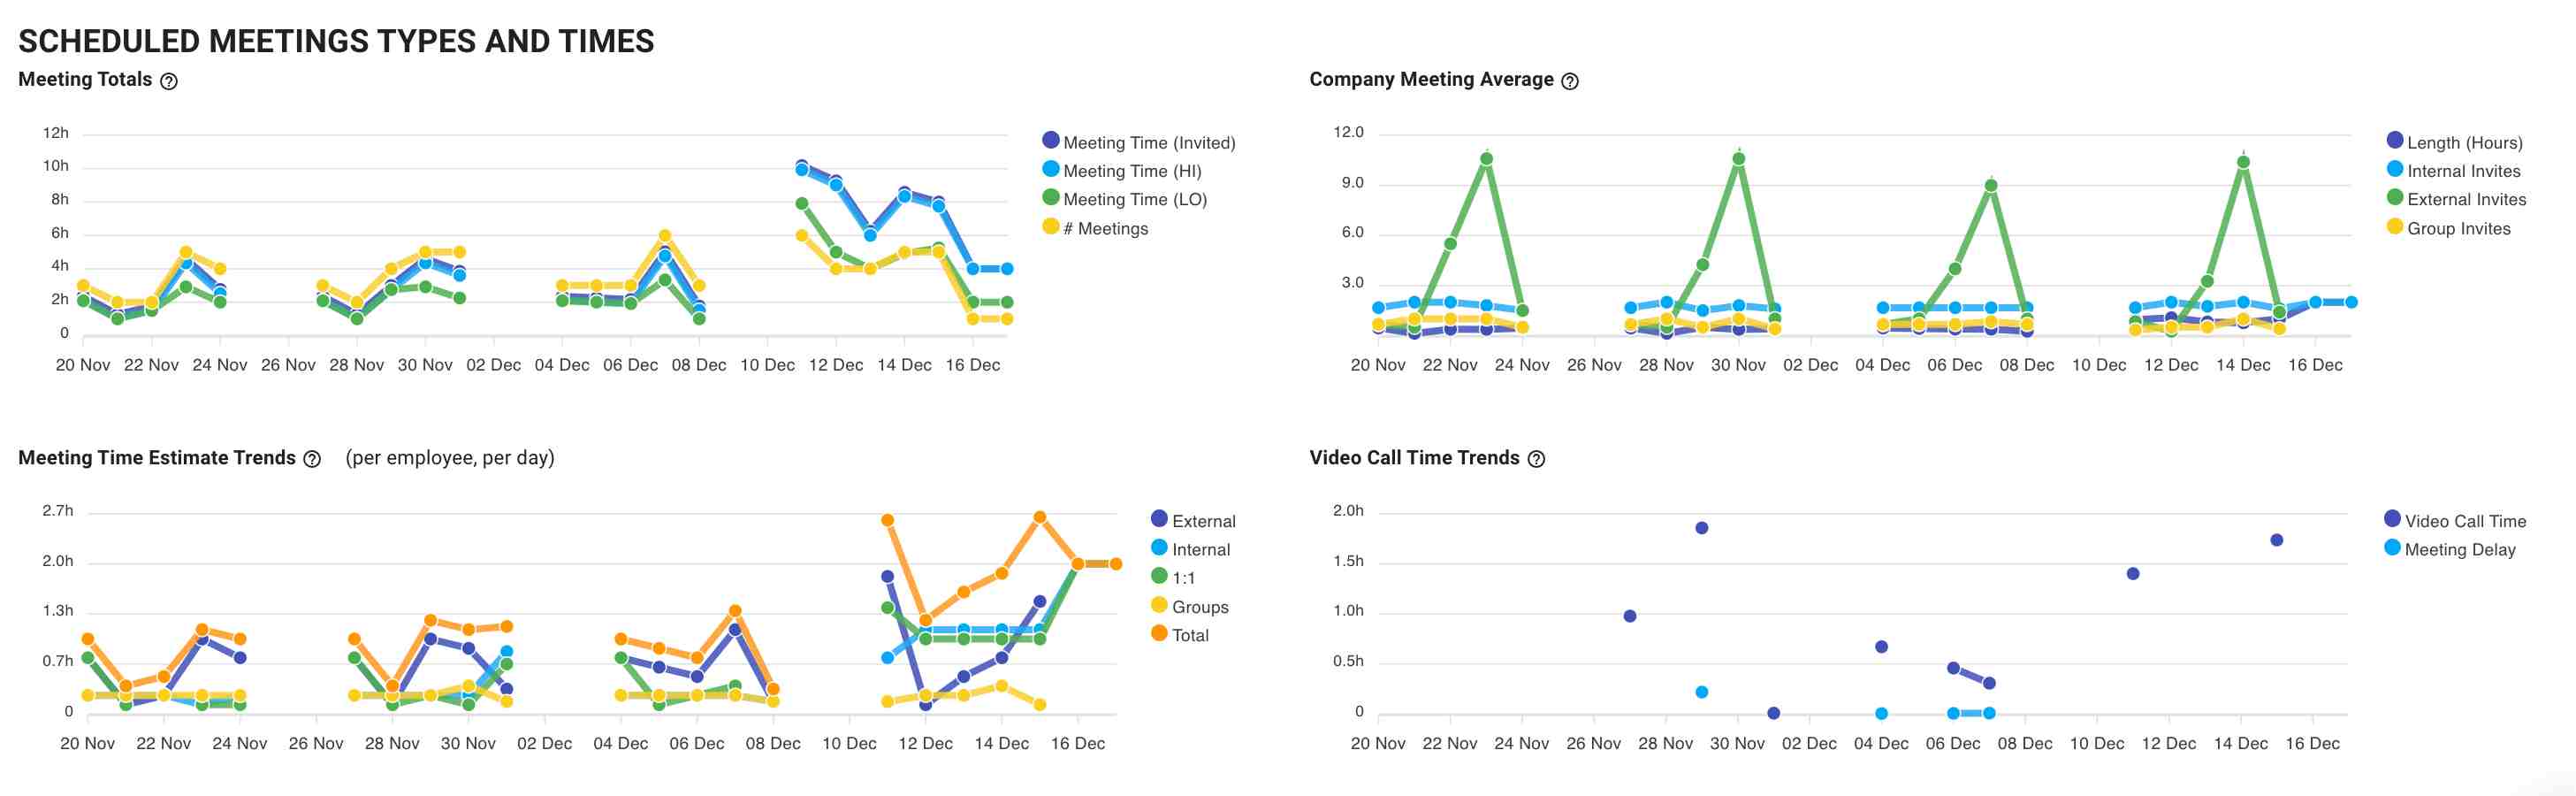 Meeting times and types on a dashboard